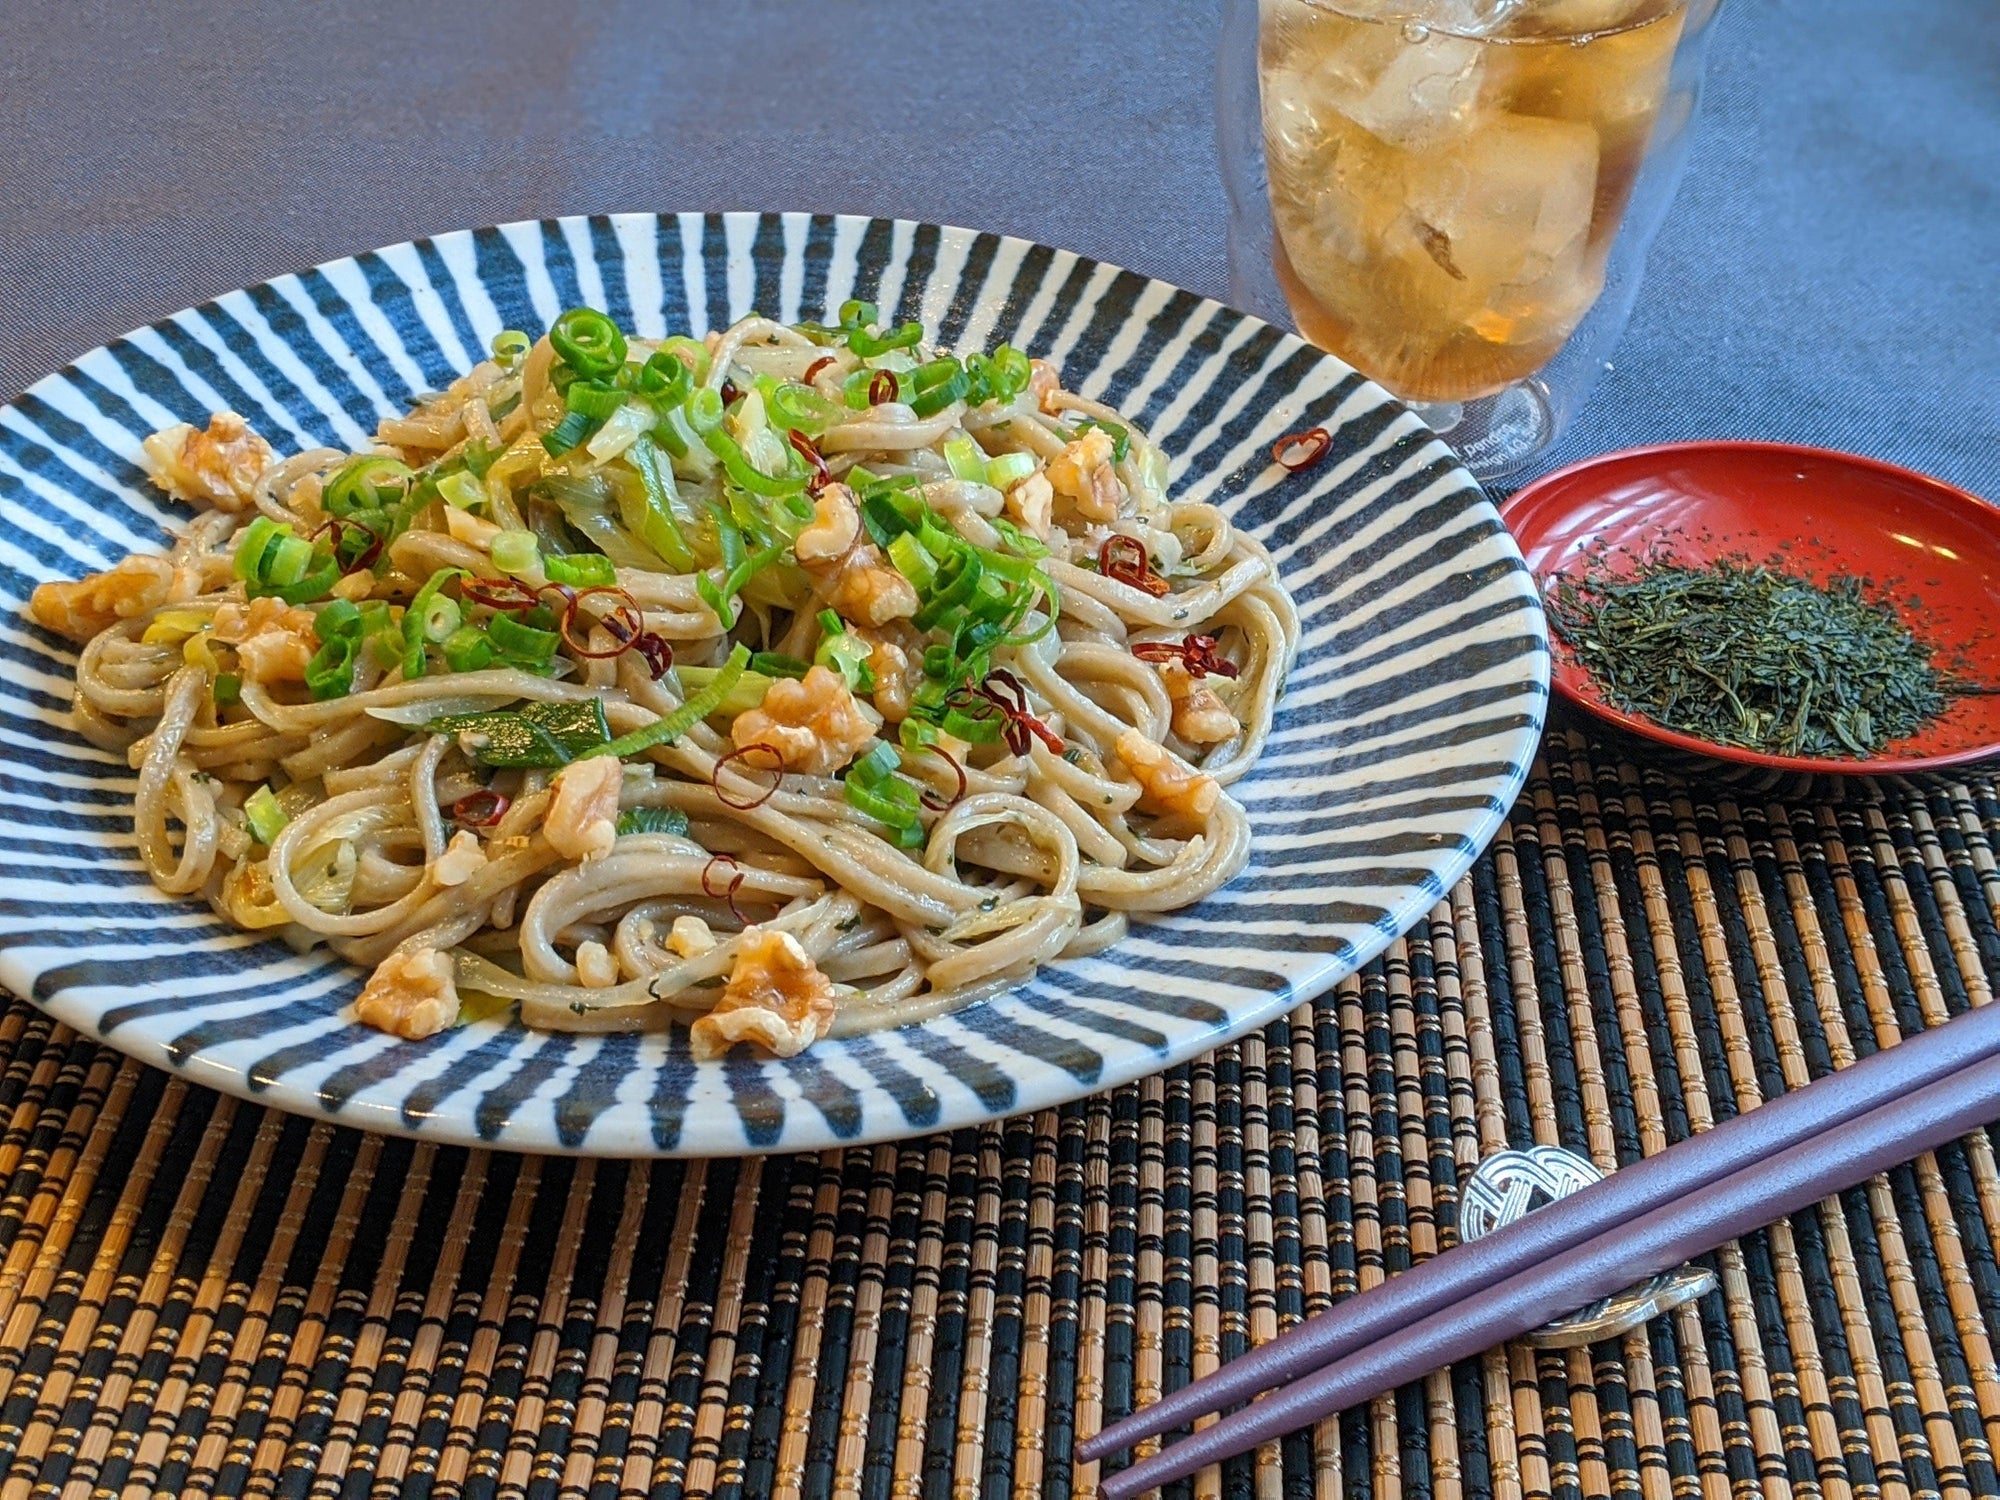 RECIPE: Vegan Yaki Udon with Green Tea Leaves - Kokoro Care Packages